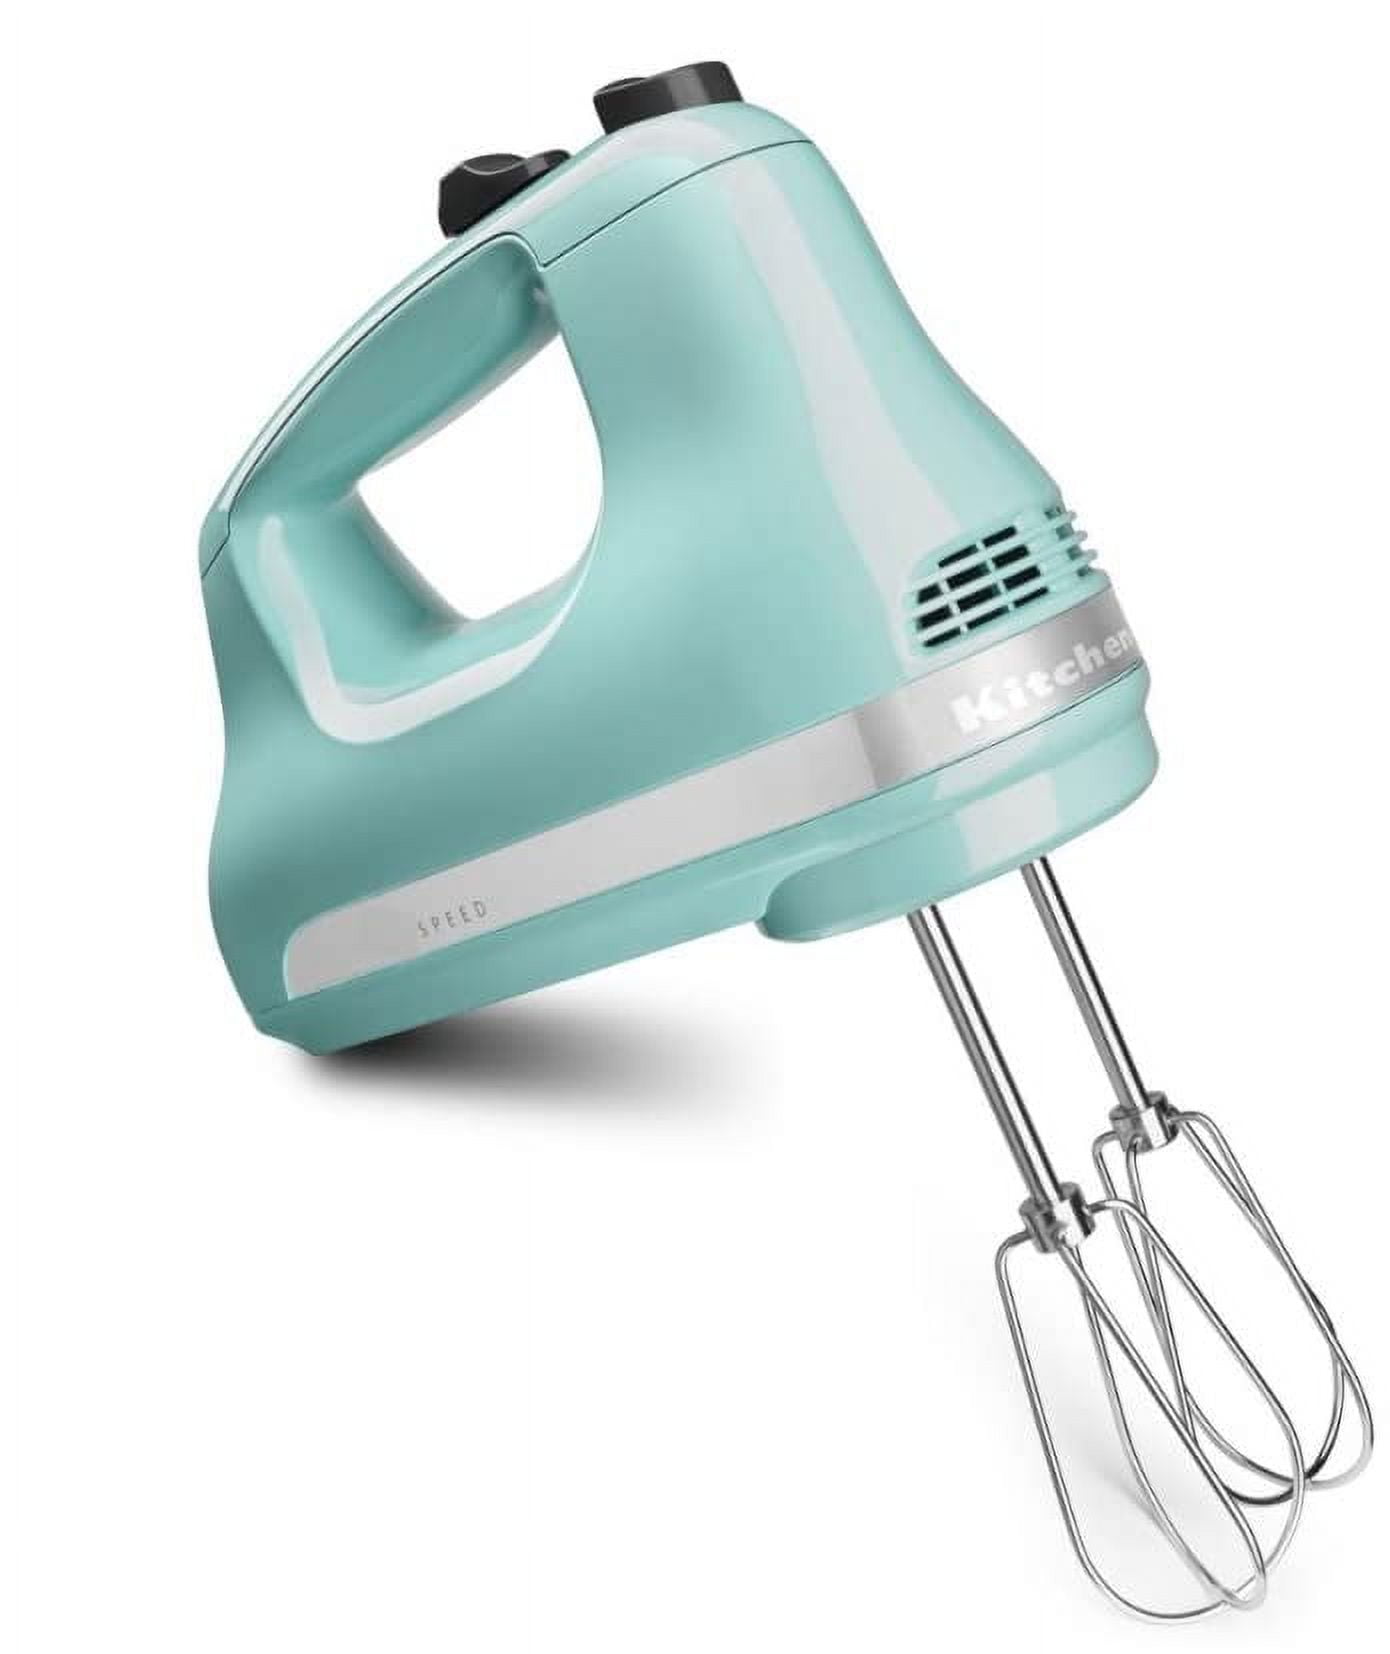 KitchenAid 3 speed ultra power hand mixer, 2 sink mats. 2c - Lil Dusty  Online Auctions - All Estate Services, LLC